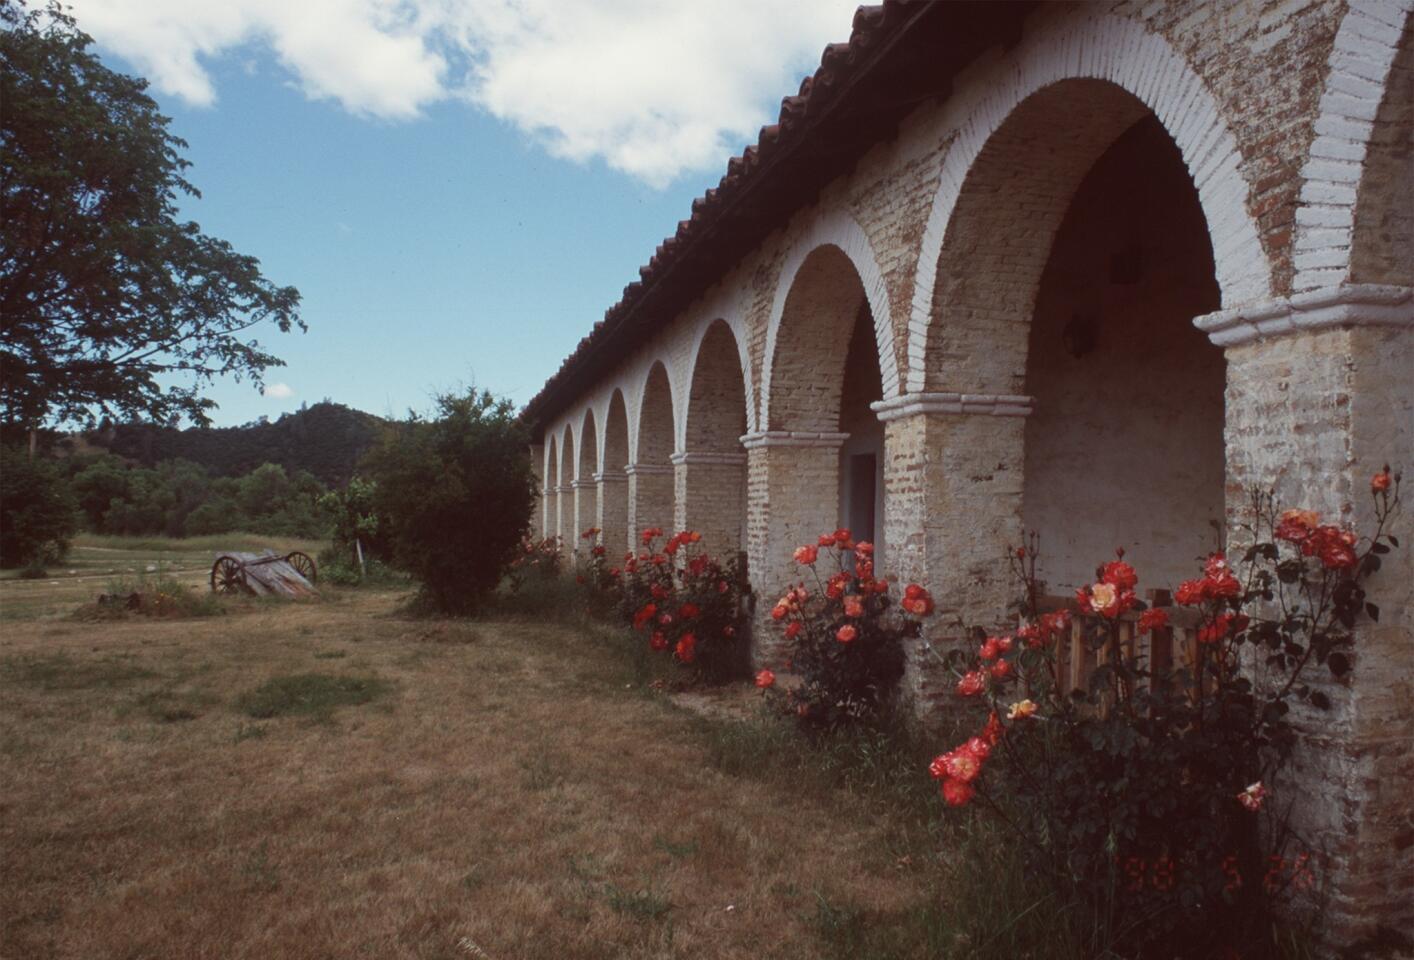 The San Antonio de Padua mission, shown in 1998, was restored in 1949 after a vigorous campaign to raise the necessary funds.